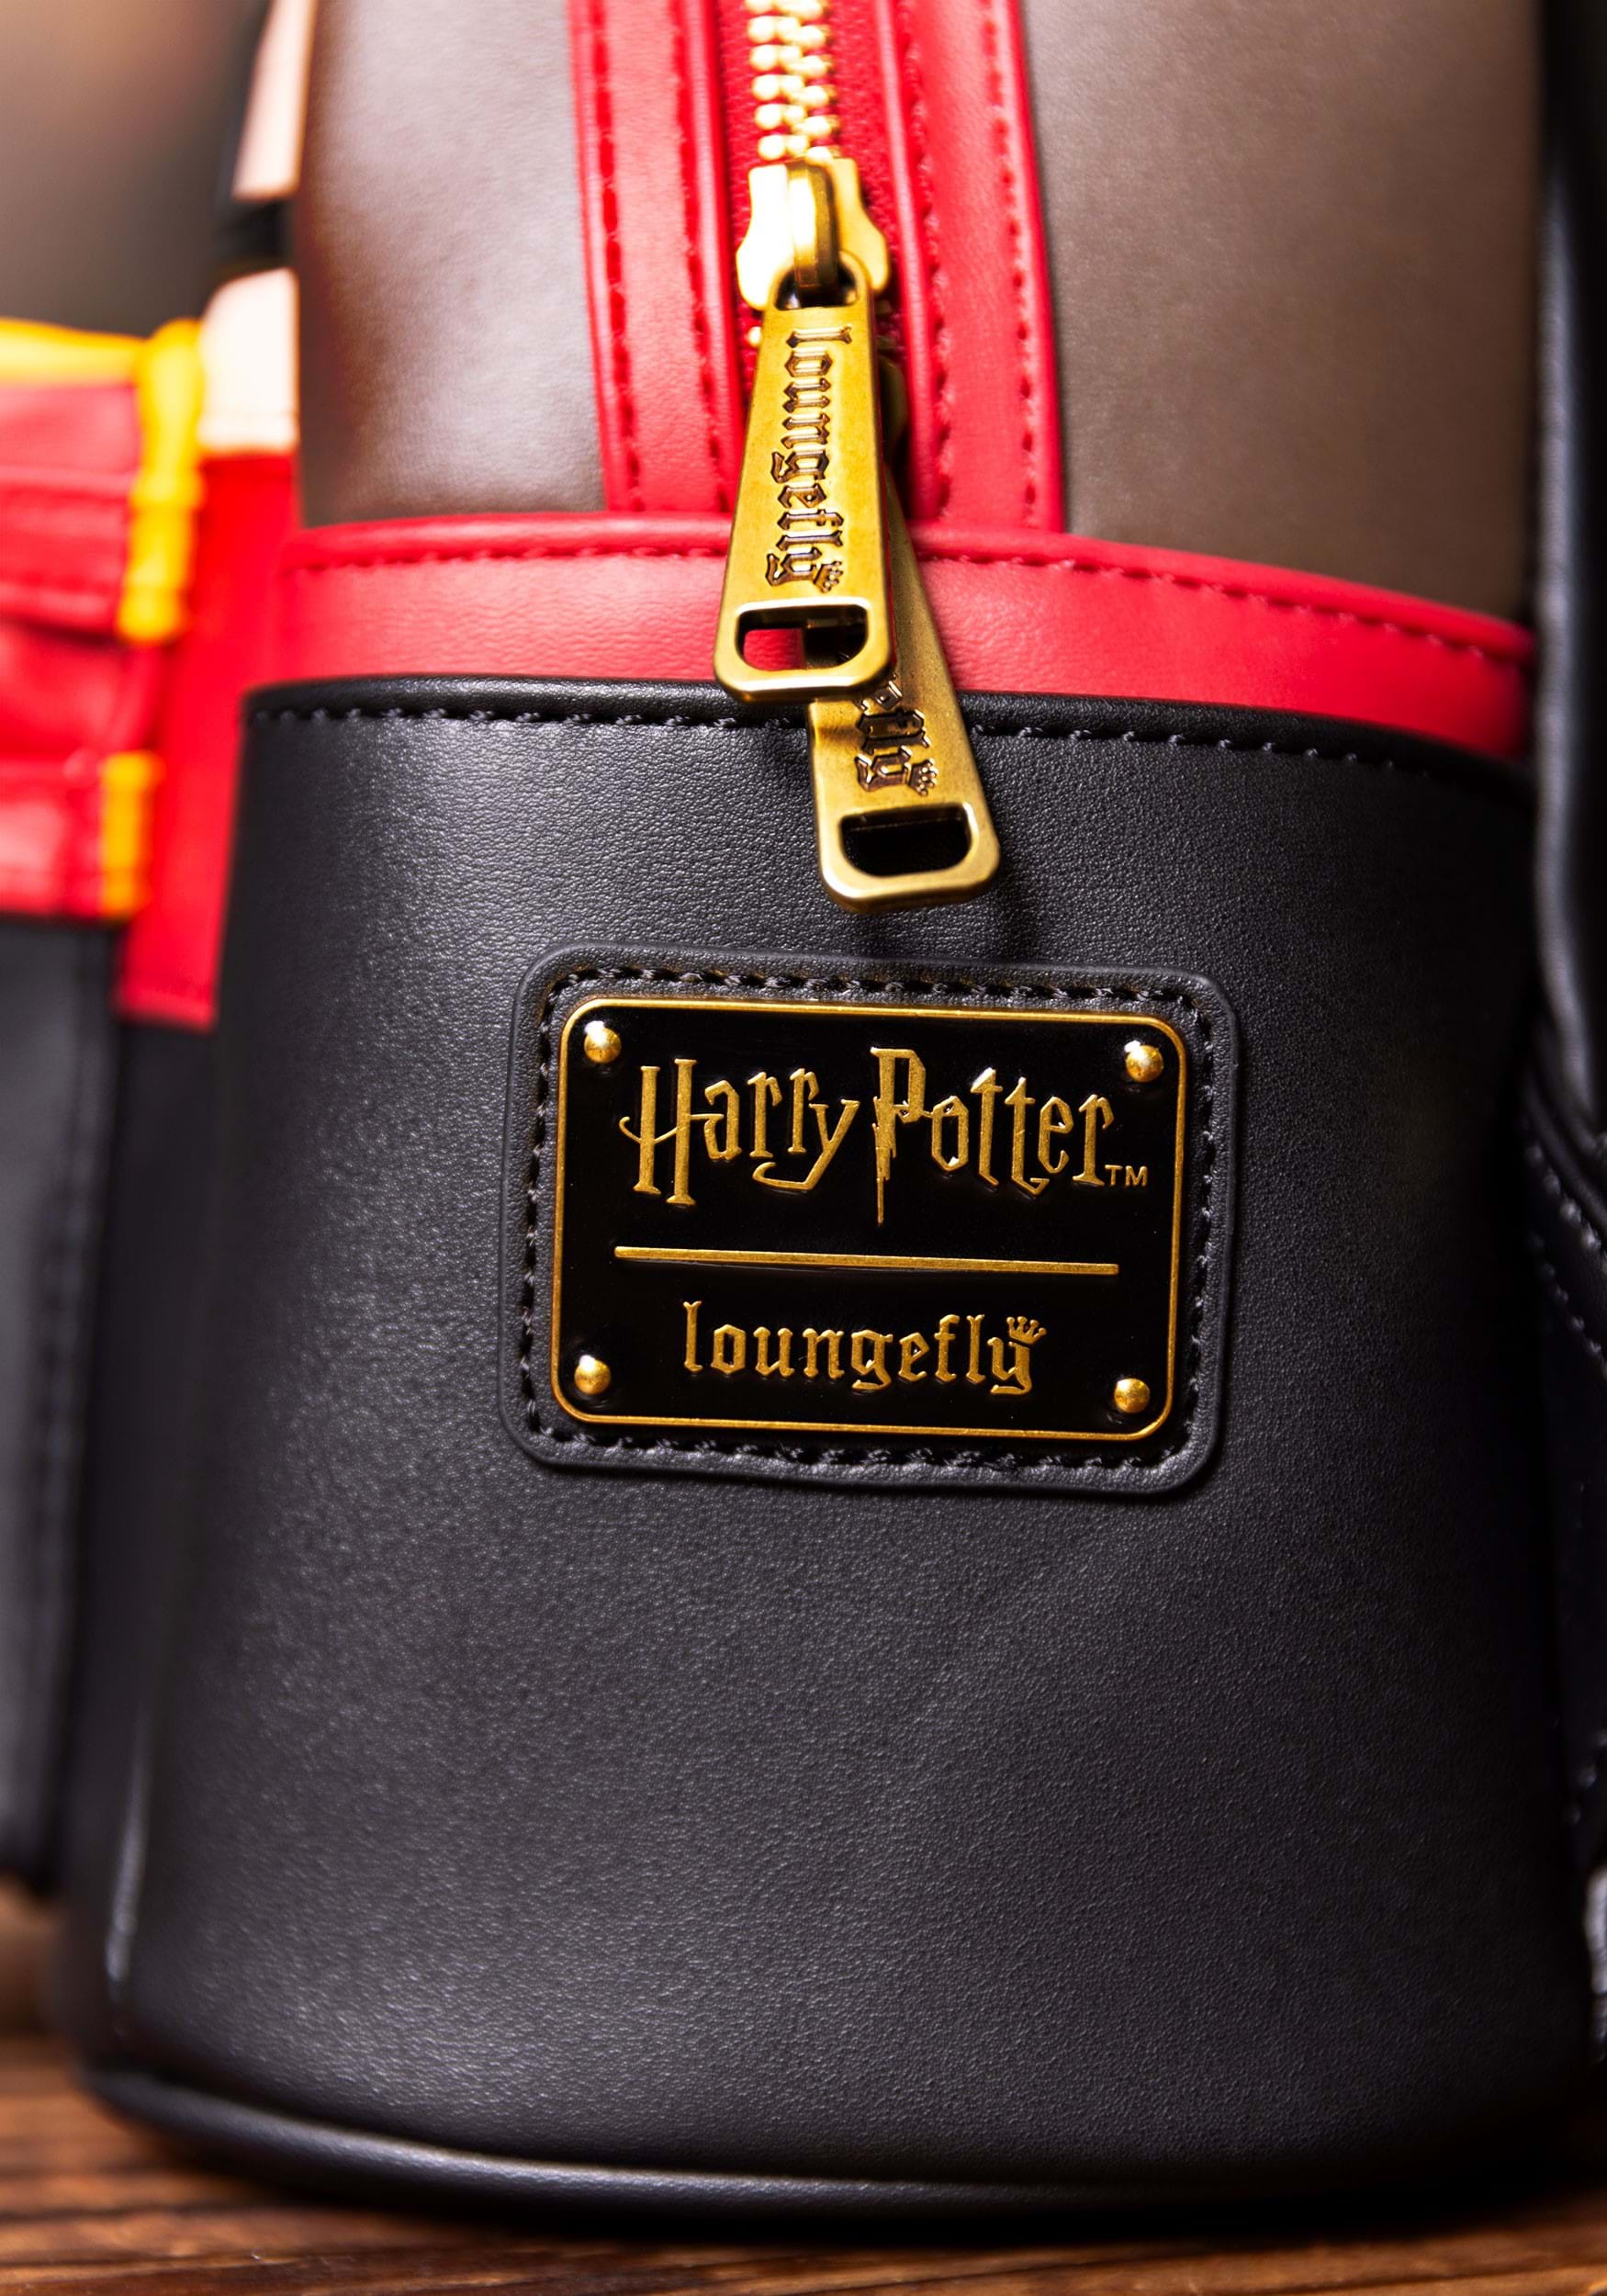 HARRY POTTER - Hogwarts Express - Mini Backpack LoungeFly 'Exclusive